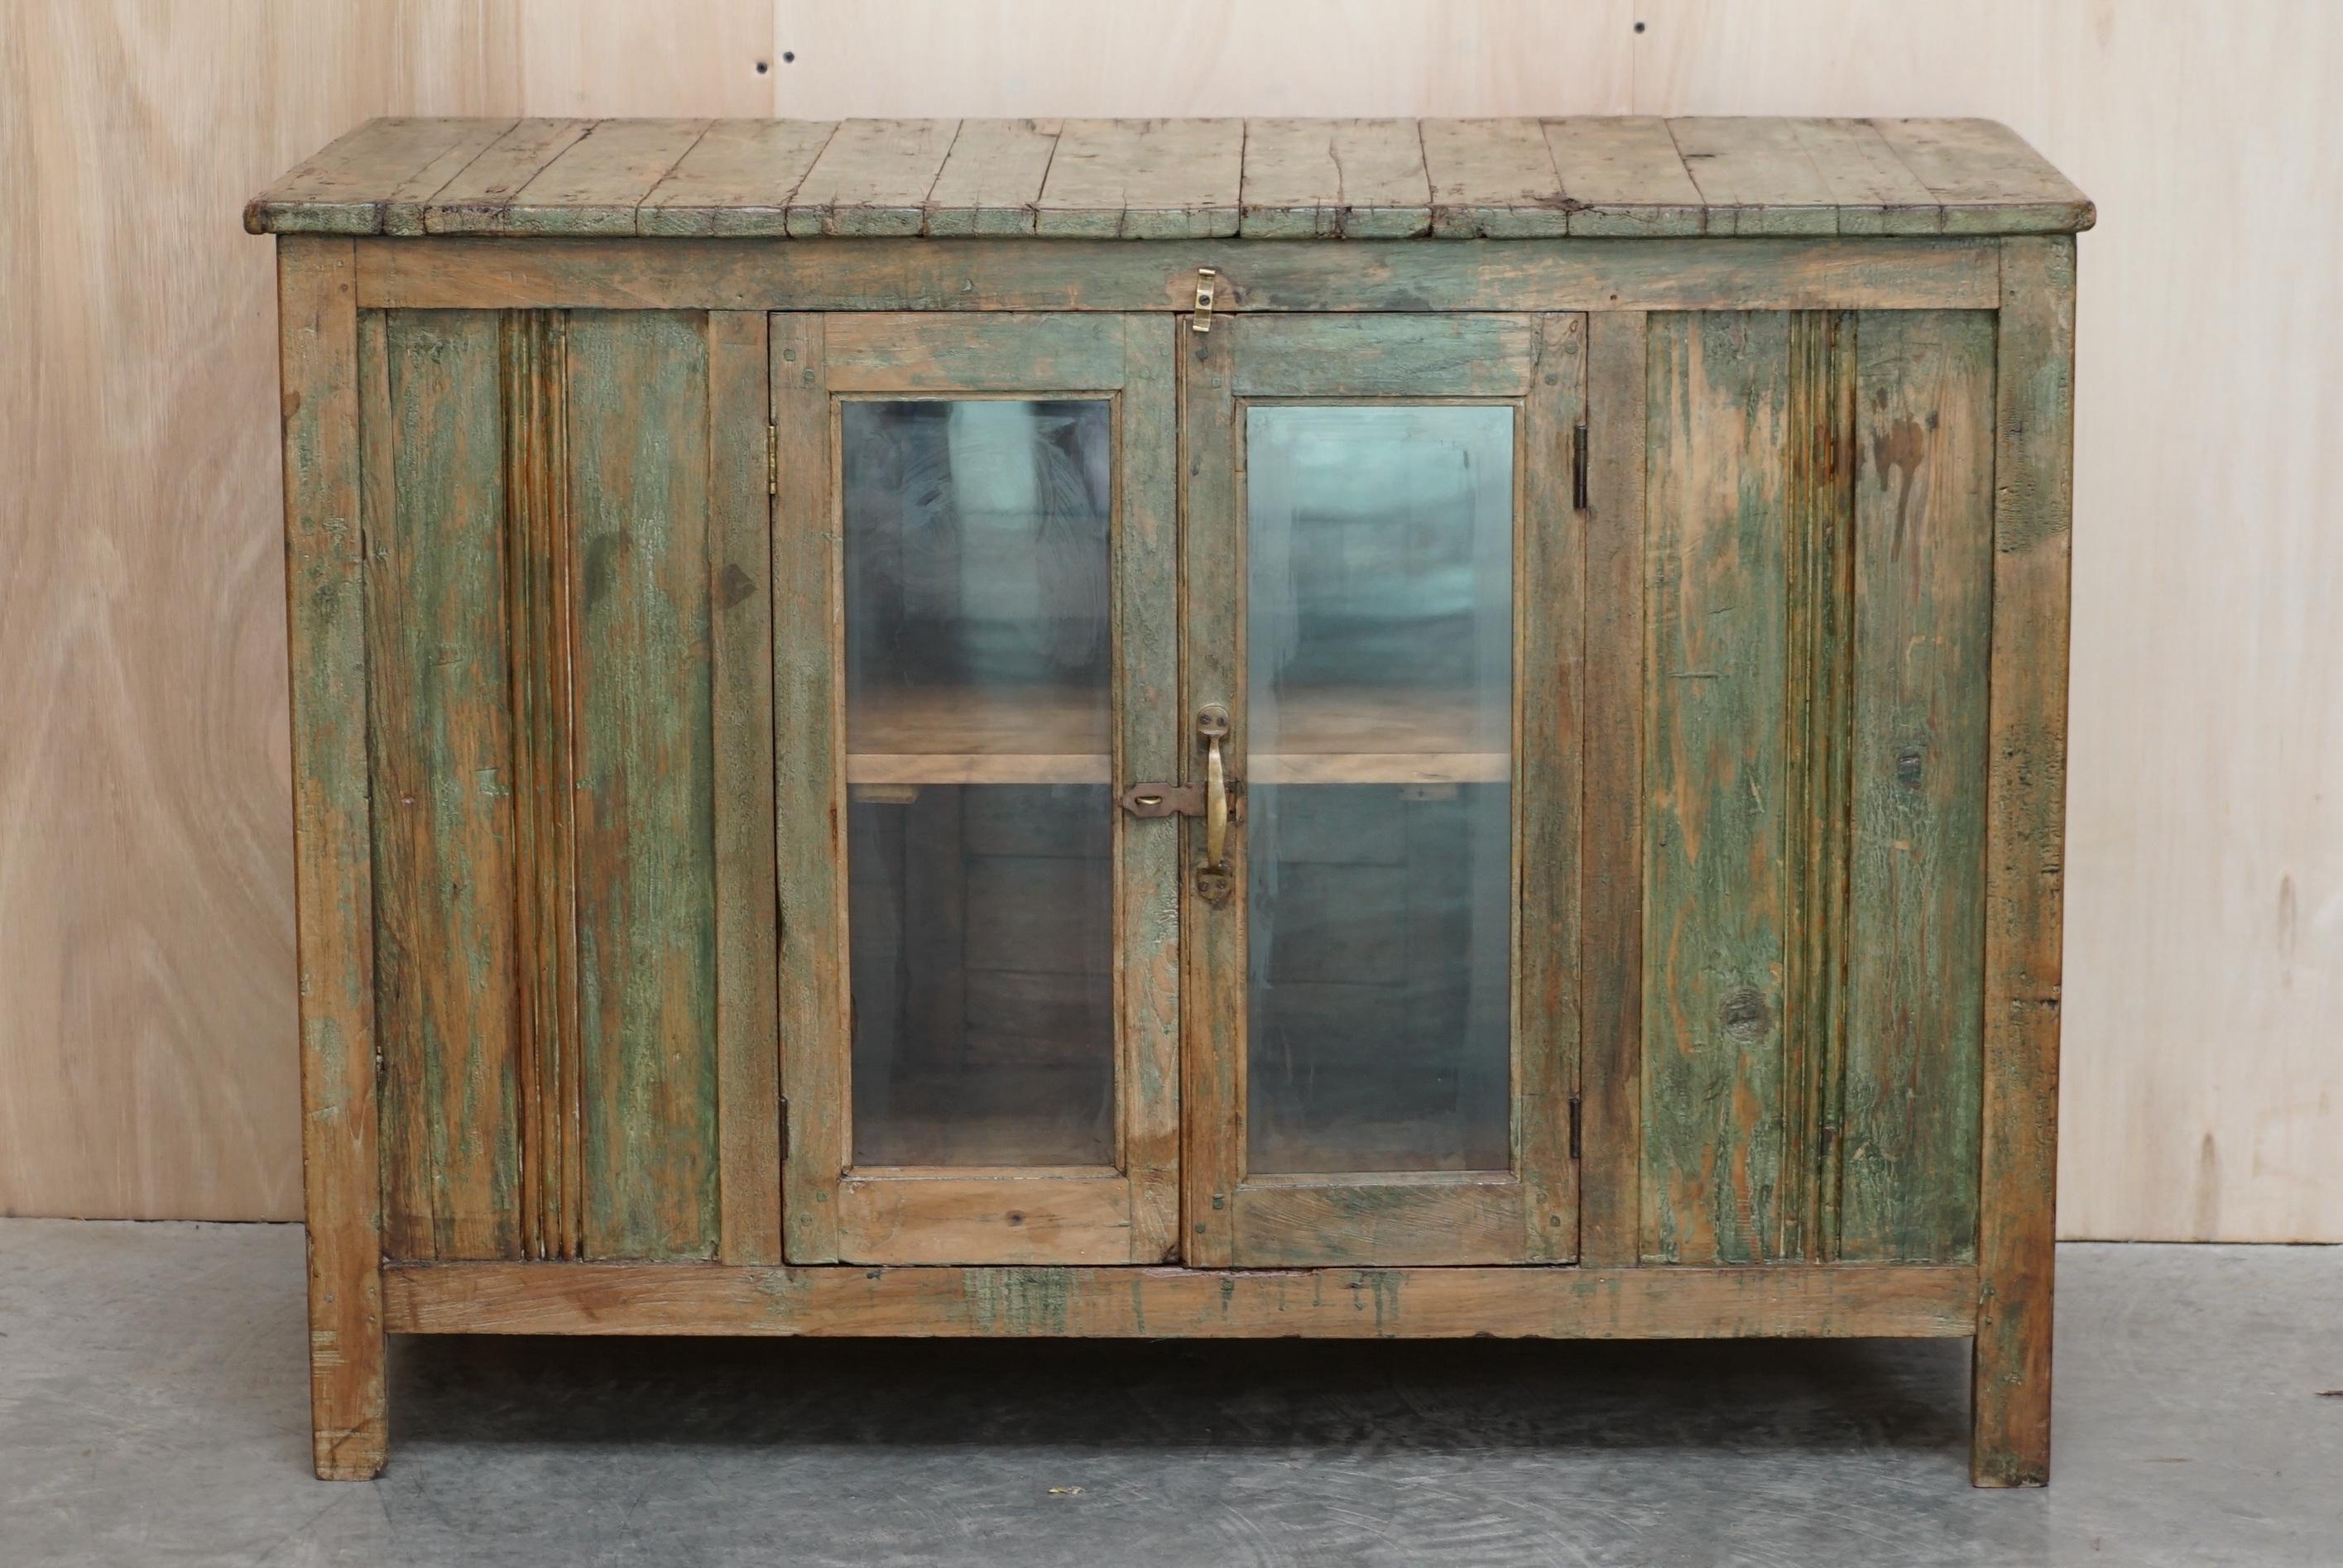 Anglo-Indian Antique circa 1900 Hand Painted Green Distressed Sideboard Cupboard Cabinet